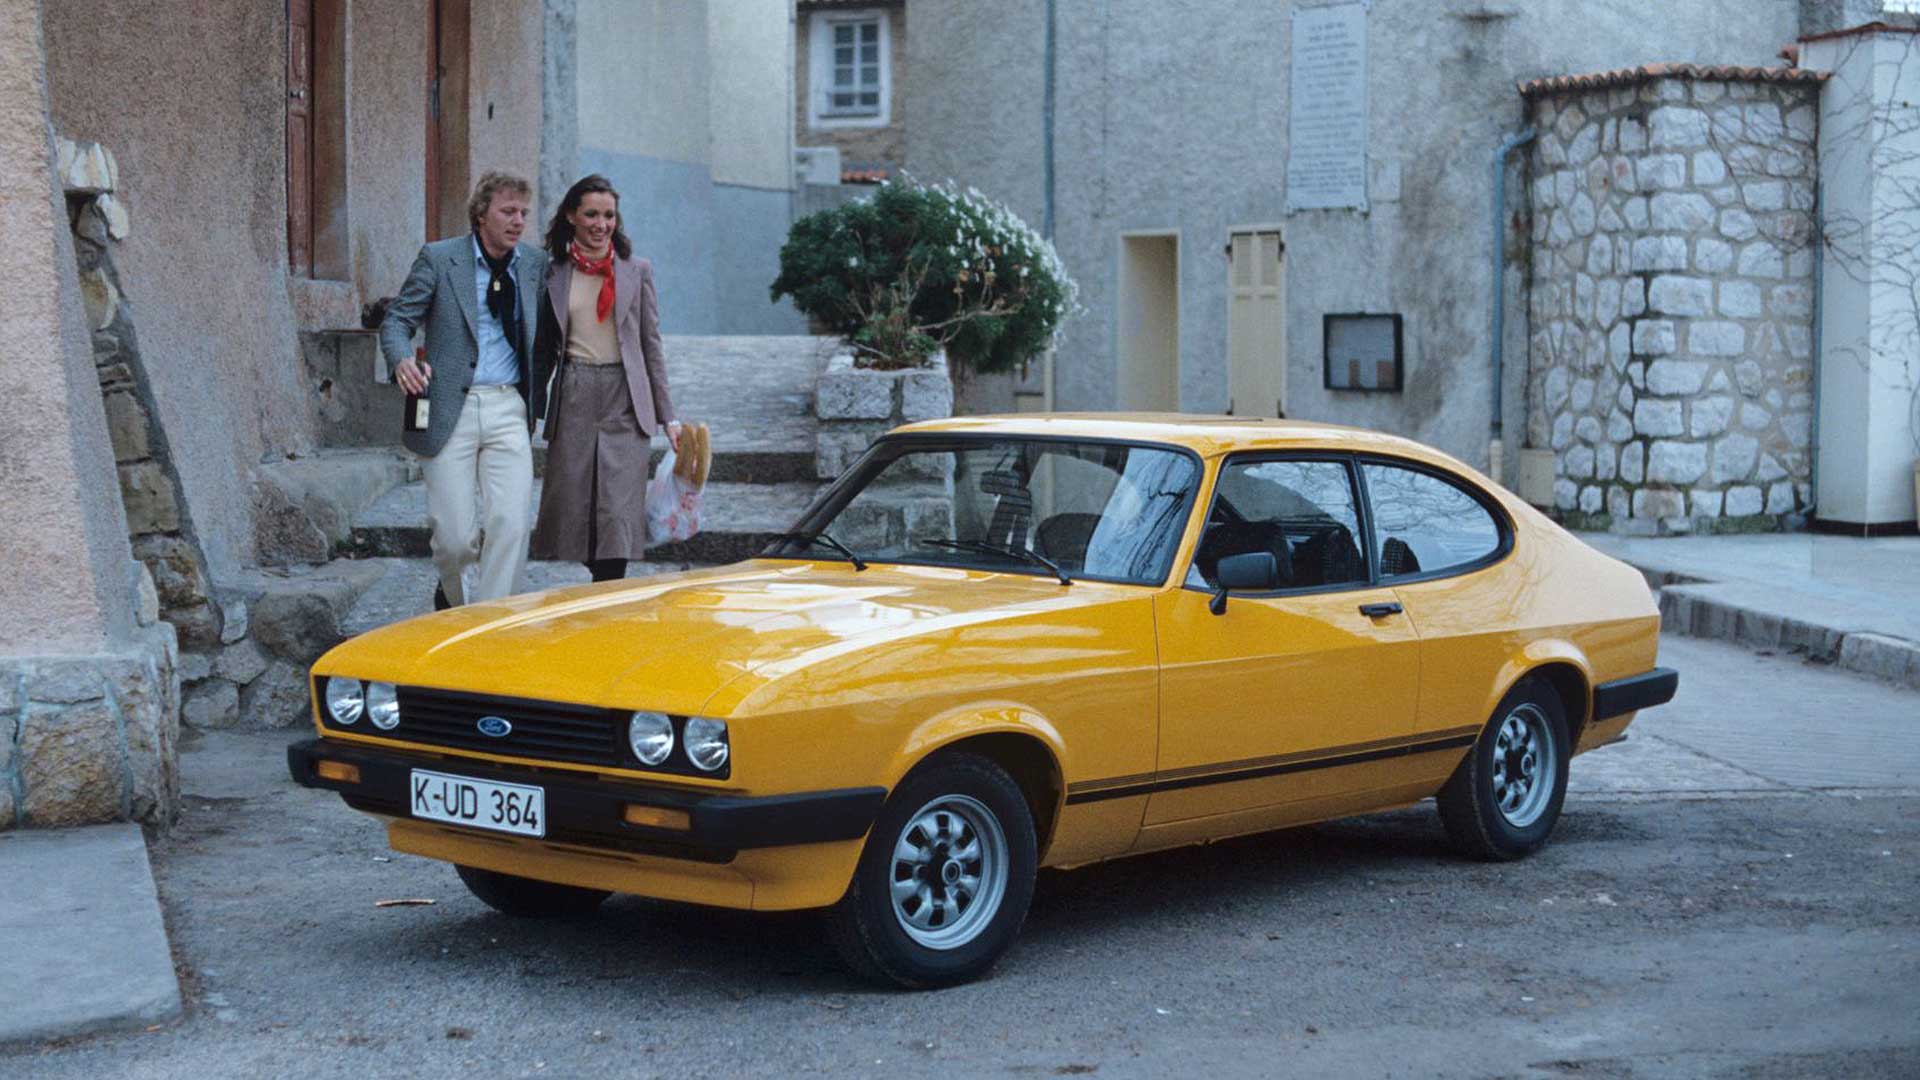 The story of the Ford Capri